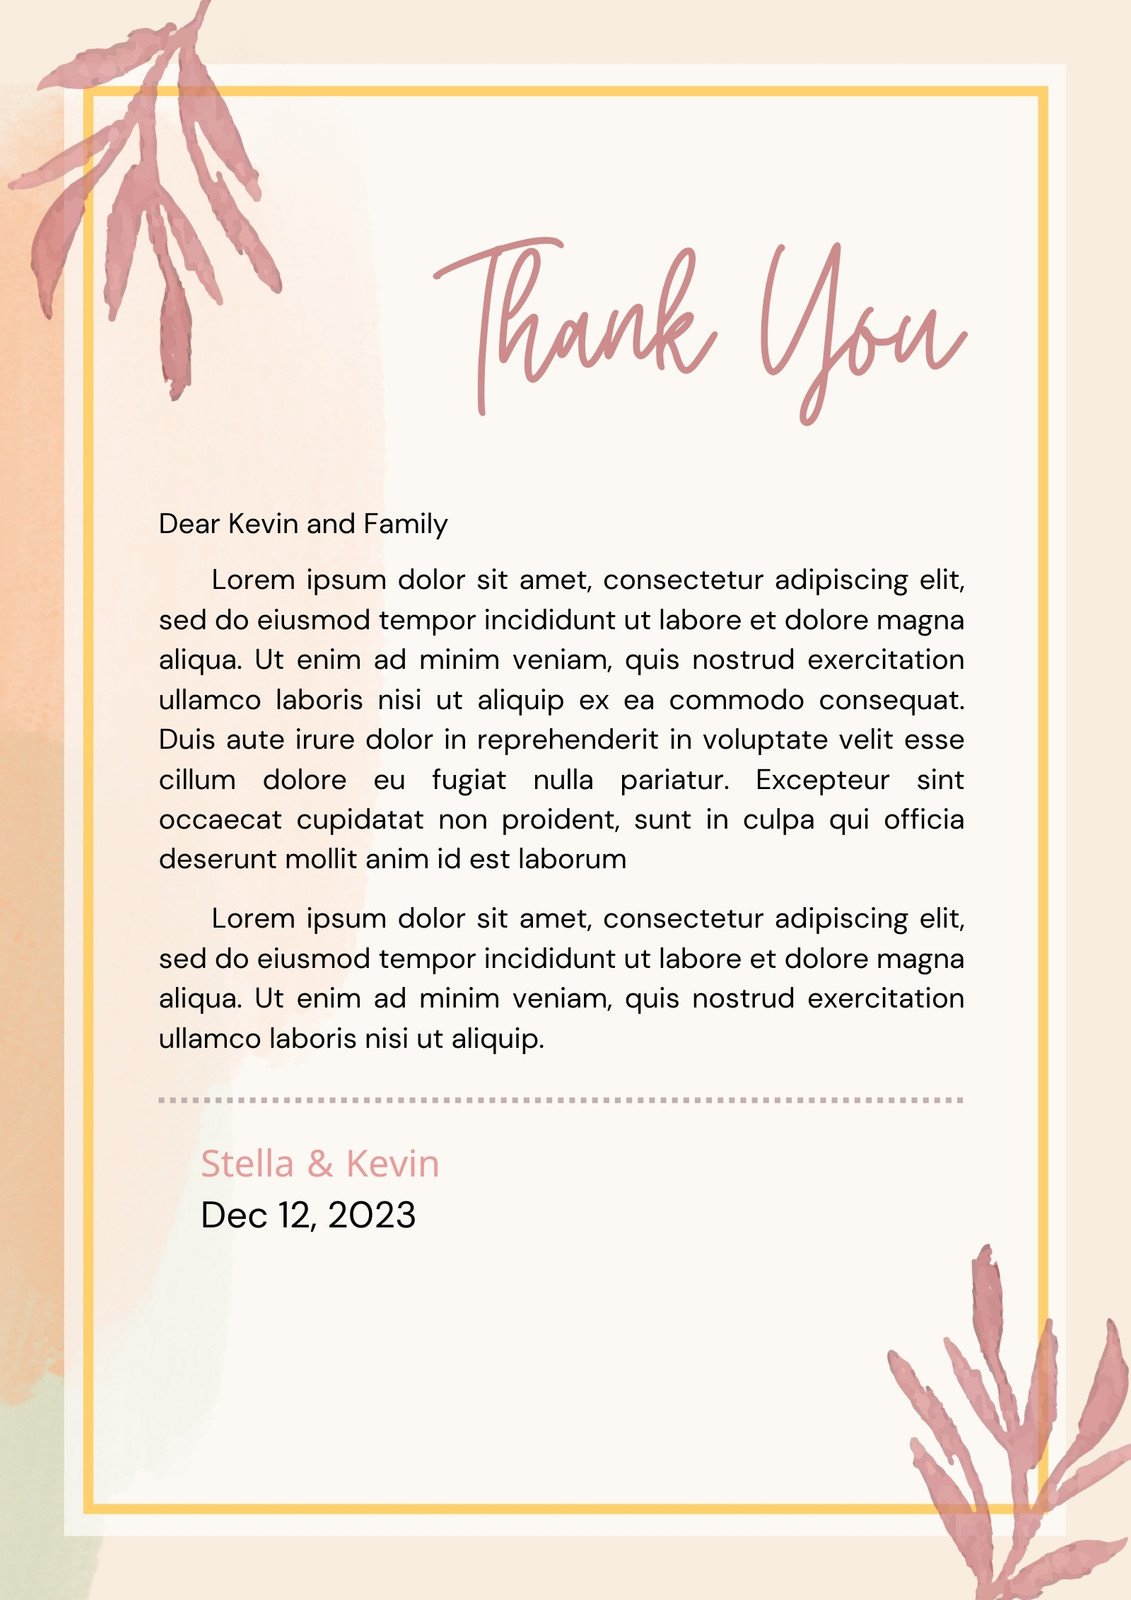 Business Formal Thank You Letter Samples